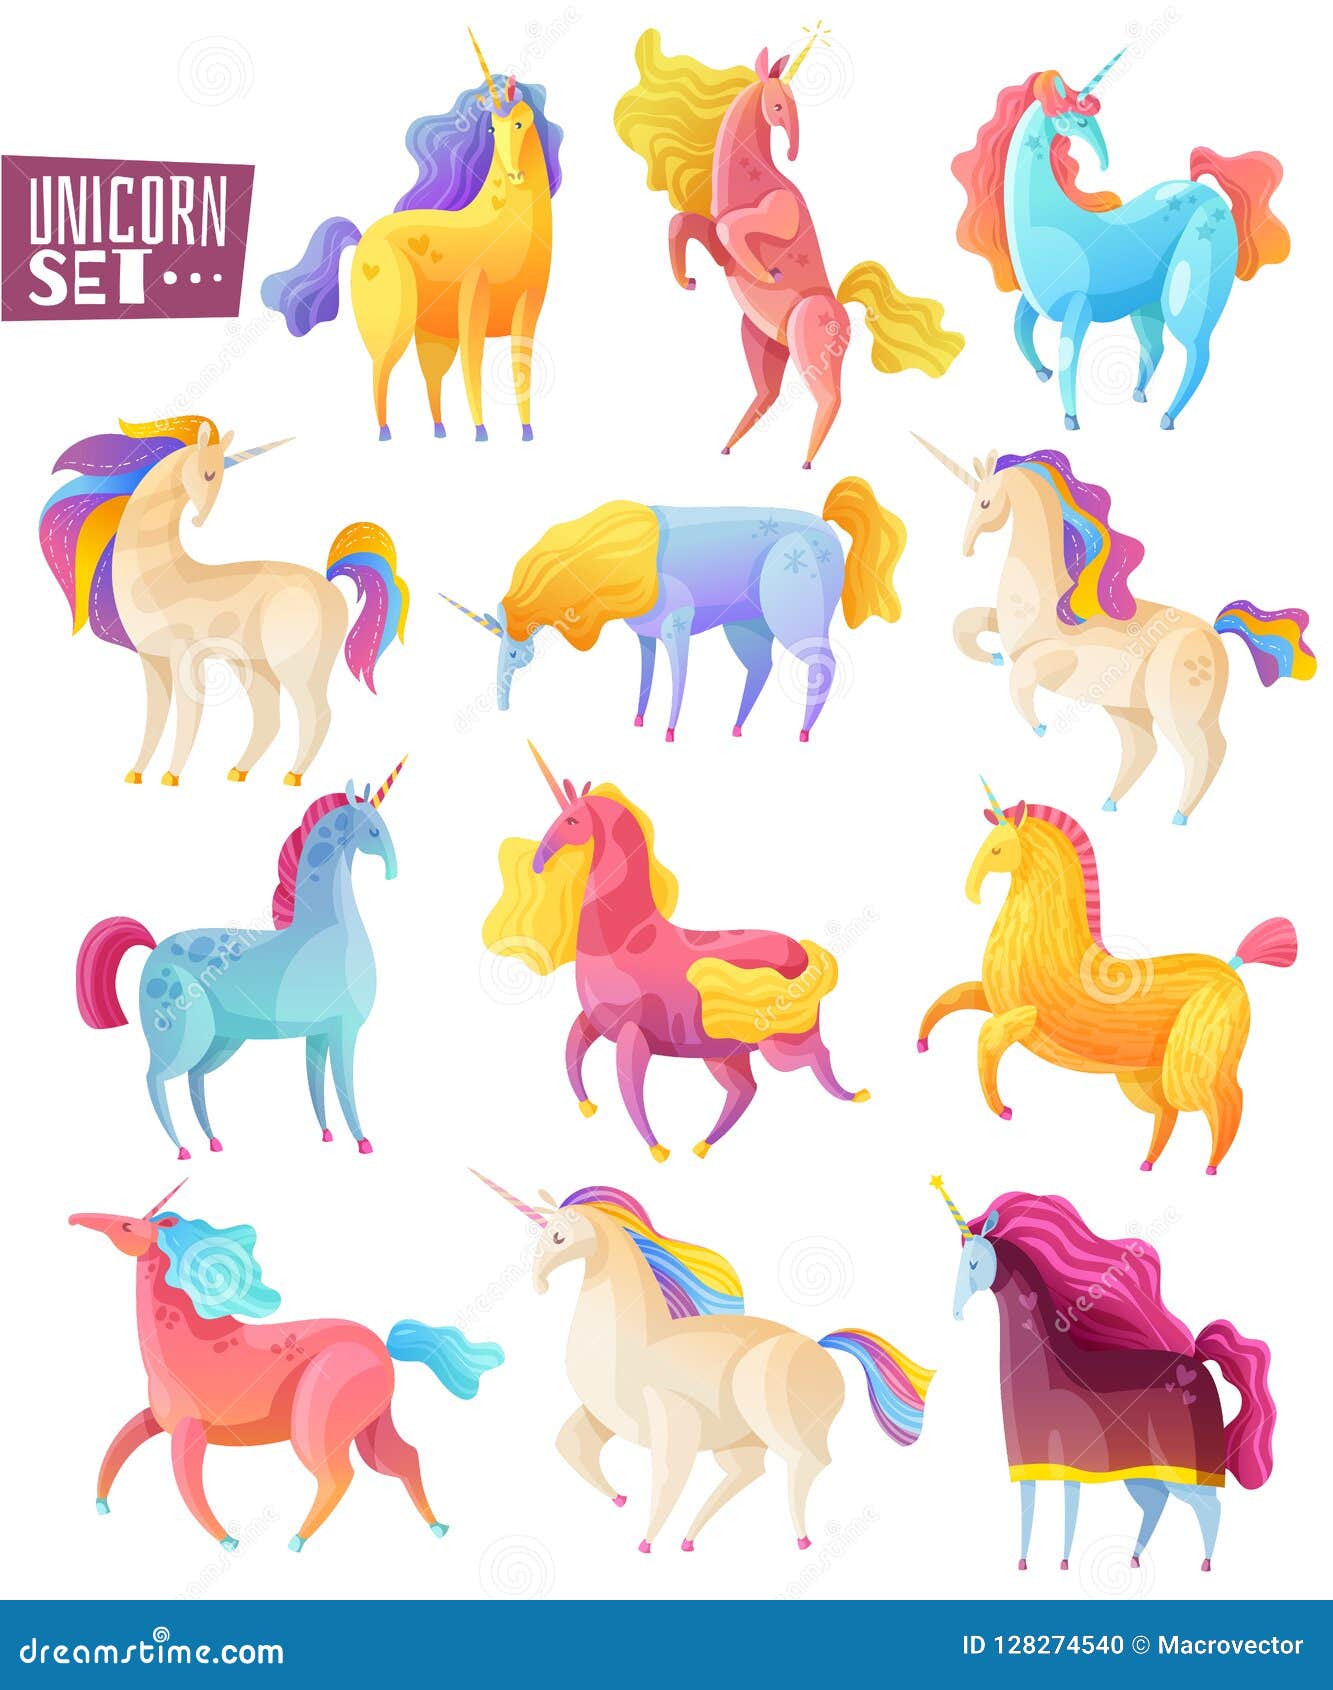 Unicorn Colored Set. Collection of magic unicorns in different poses painted in various colors in cartoon style isolated vector illustration